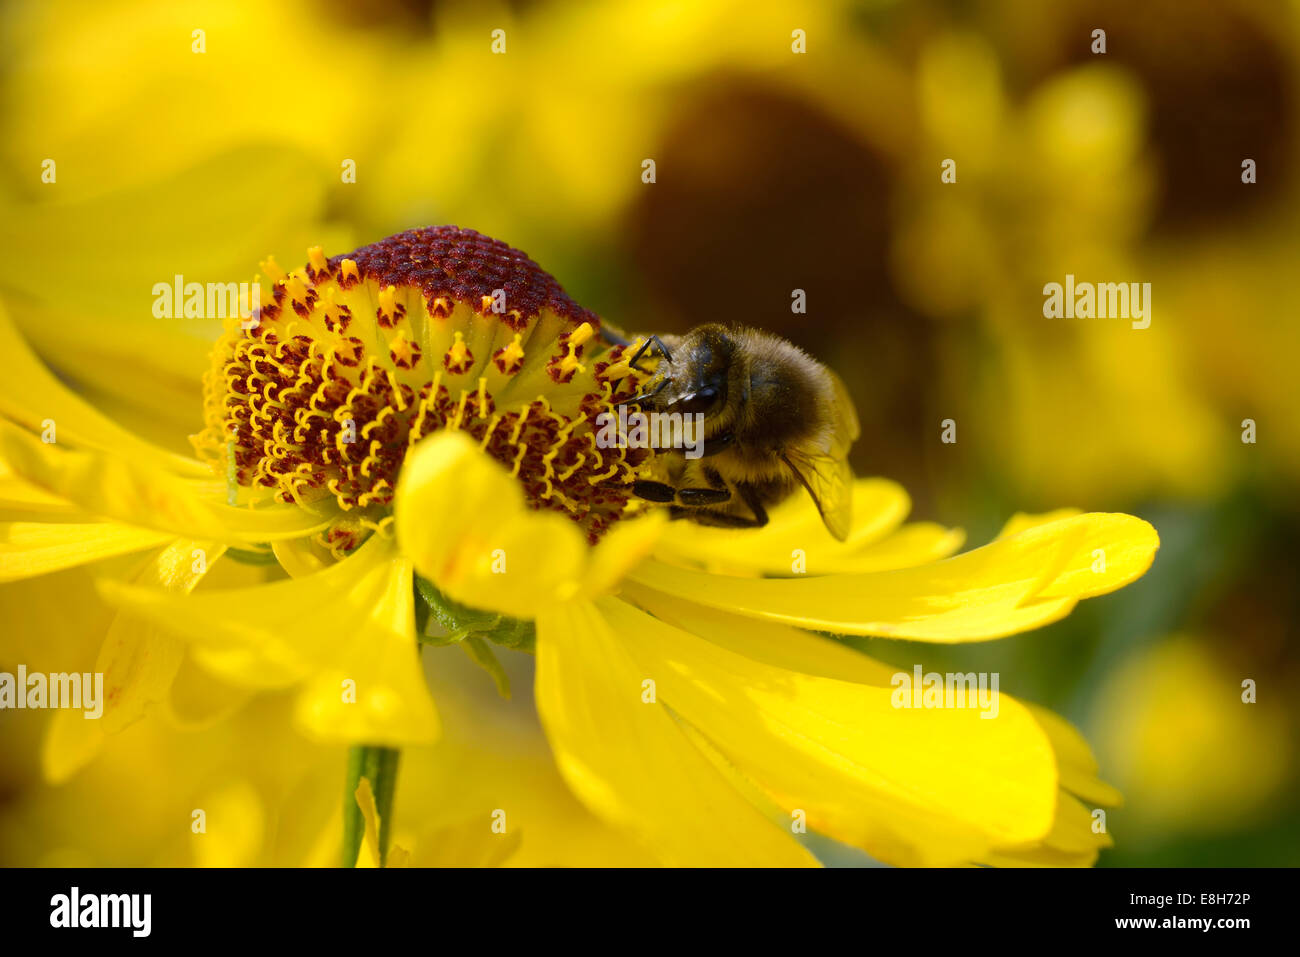 Blossom of sneezeweed, Helenium, with insect Stock Photo